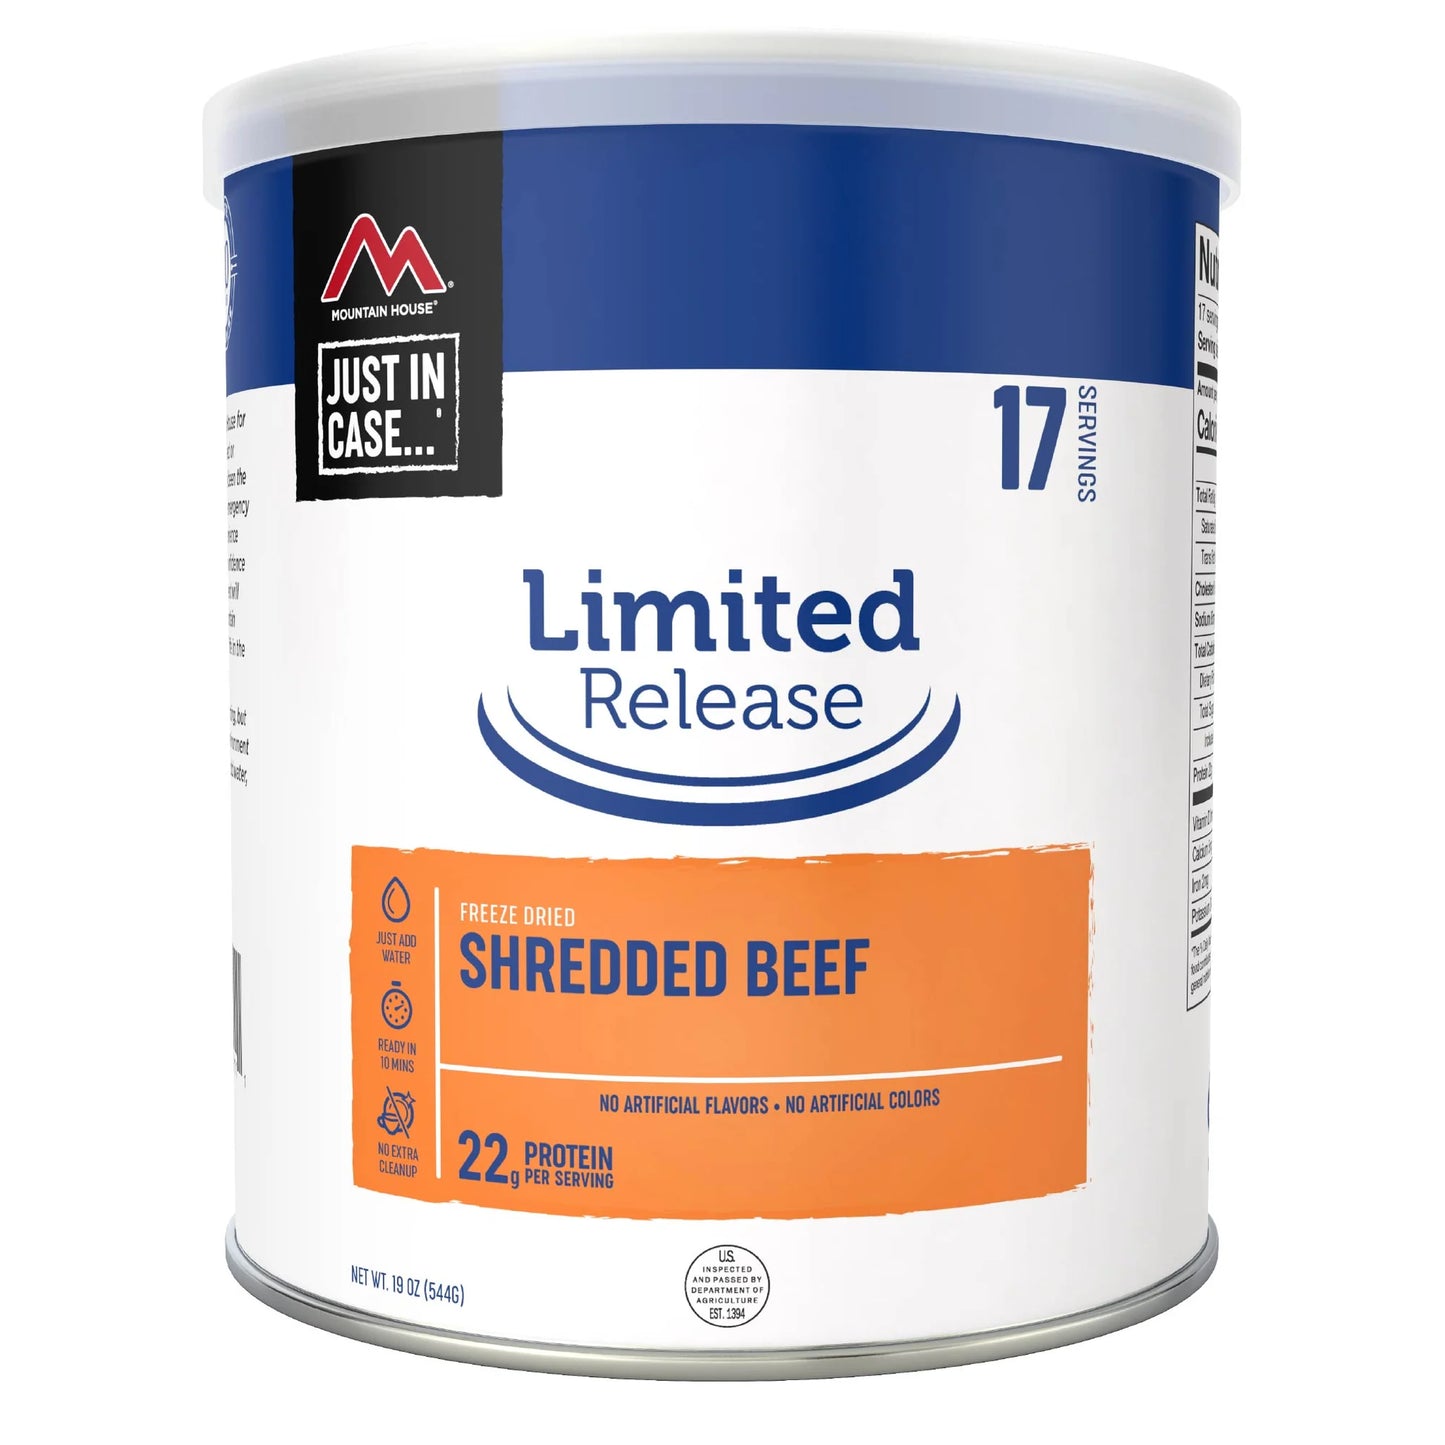 Shredded Beef Limited Release #10 Can - 1 CAN - 17 Serving